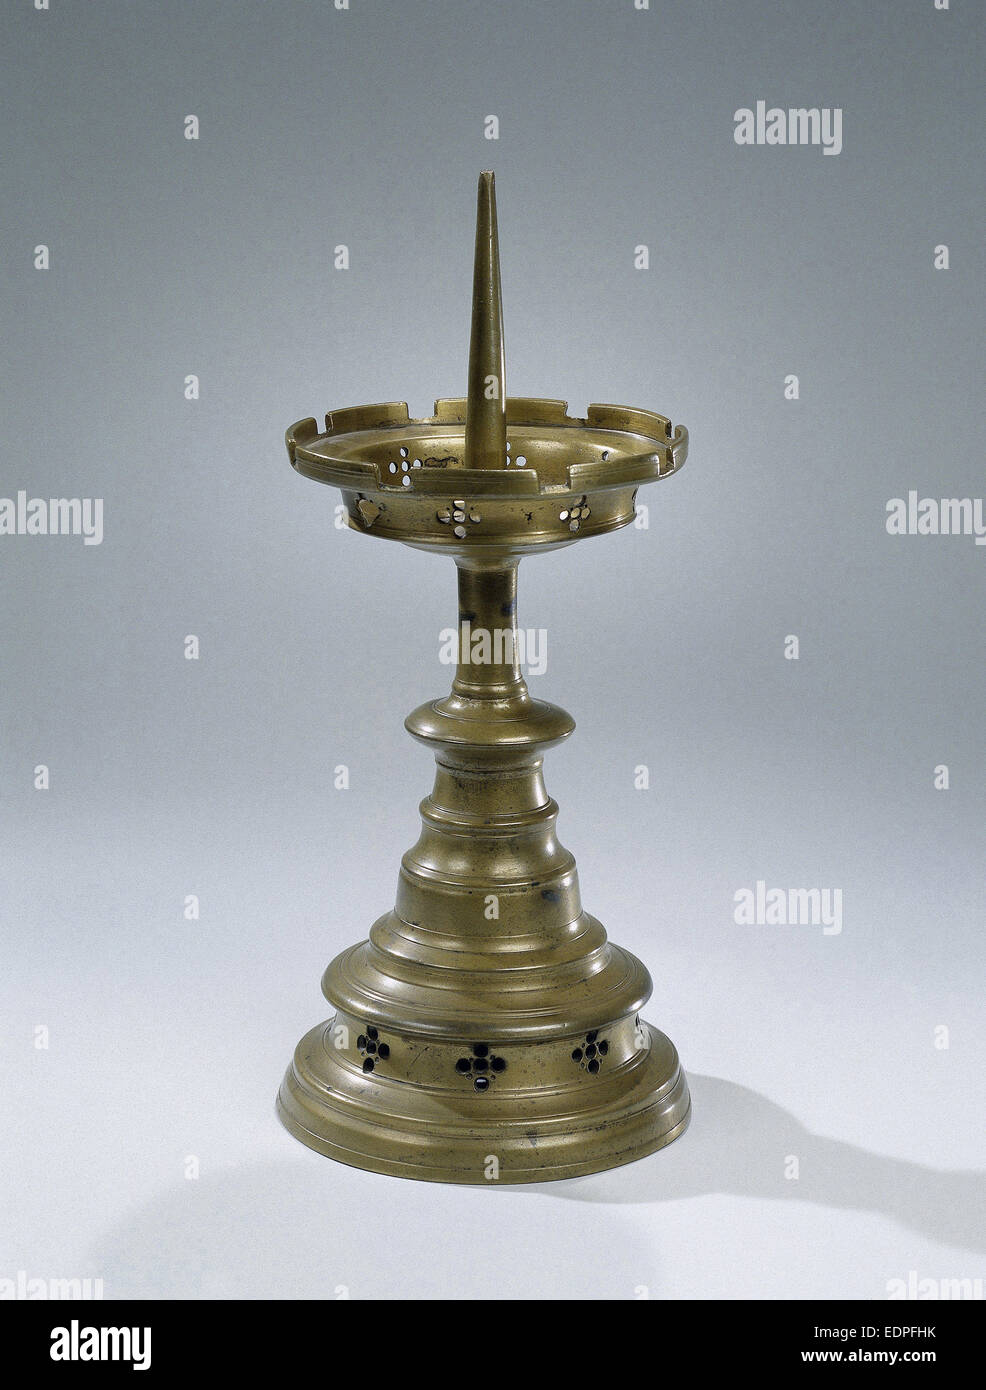 Pricket Candlestick, French